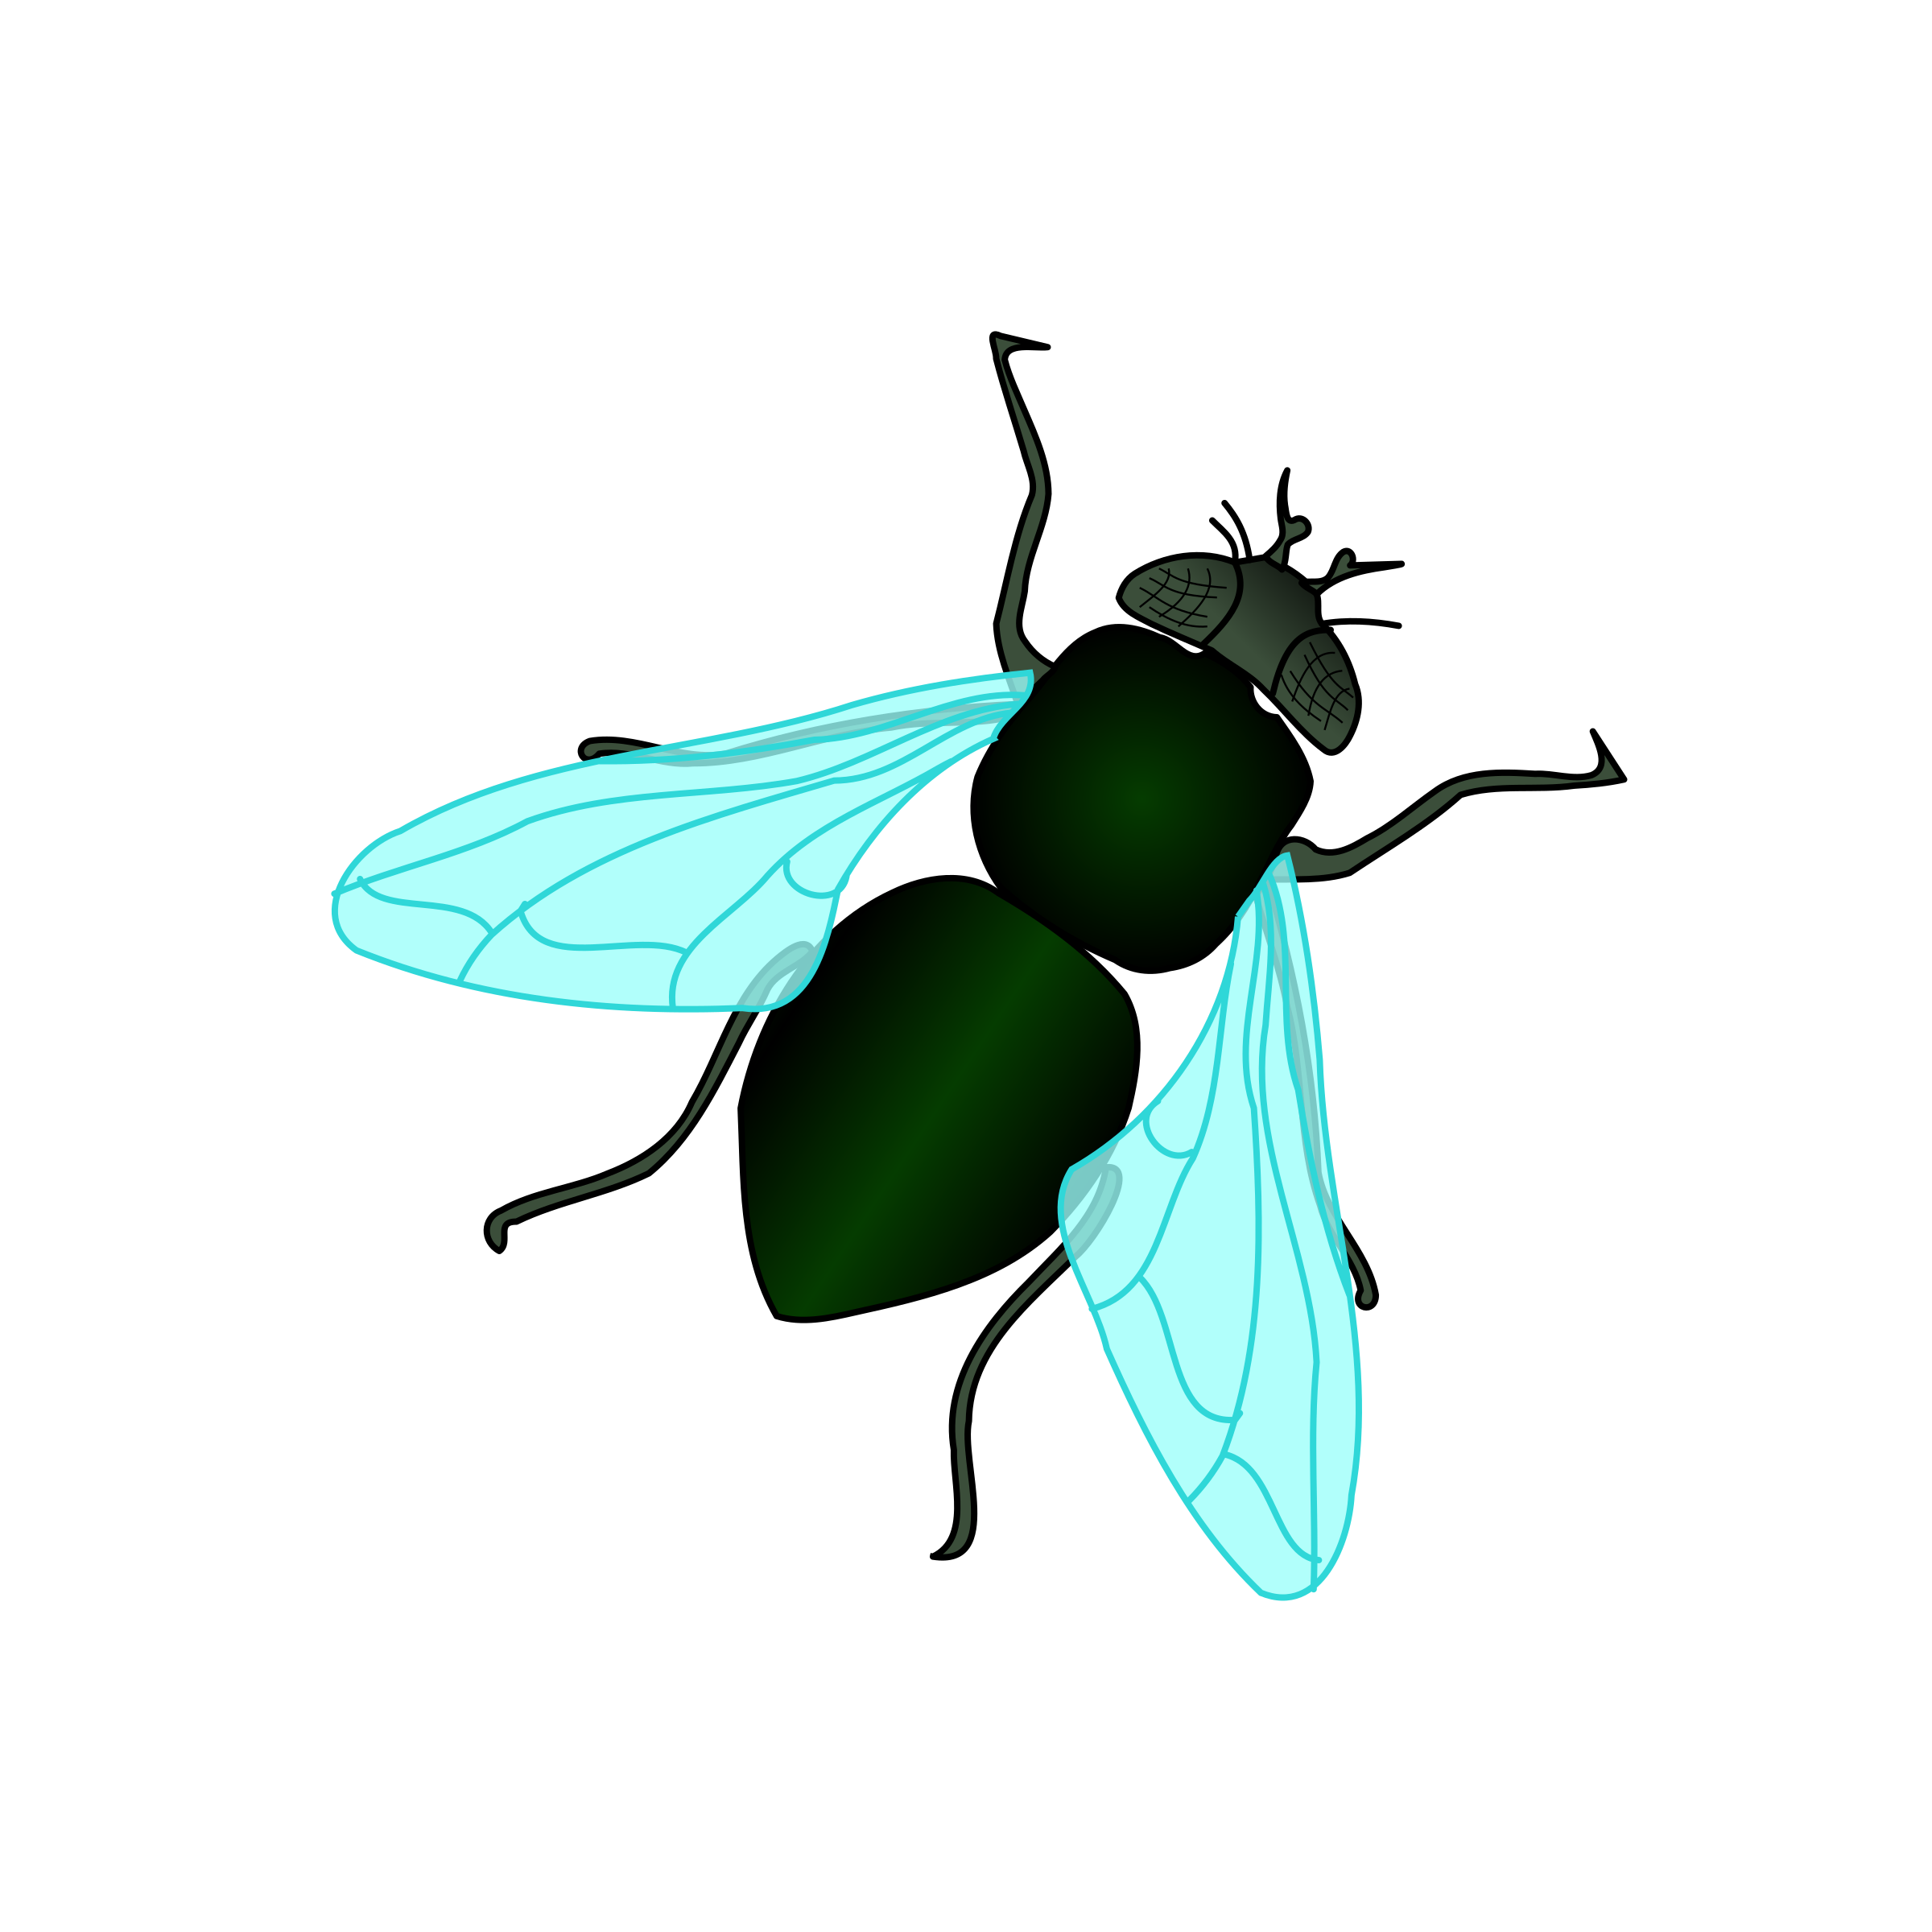 fly images clip art - photo #28